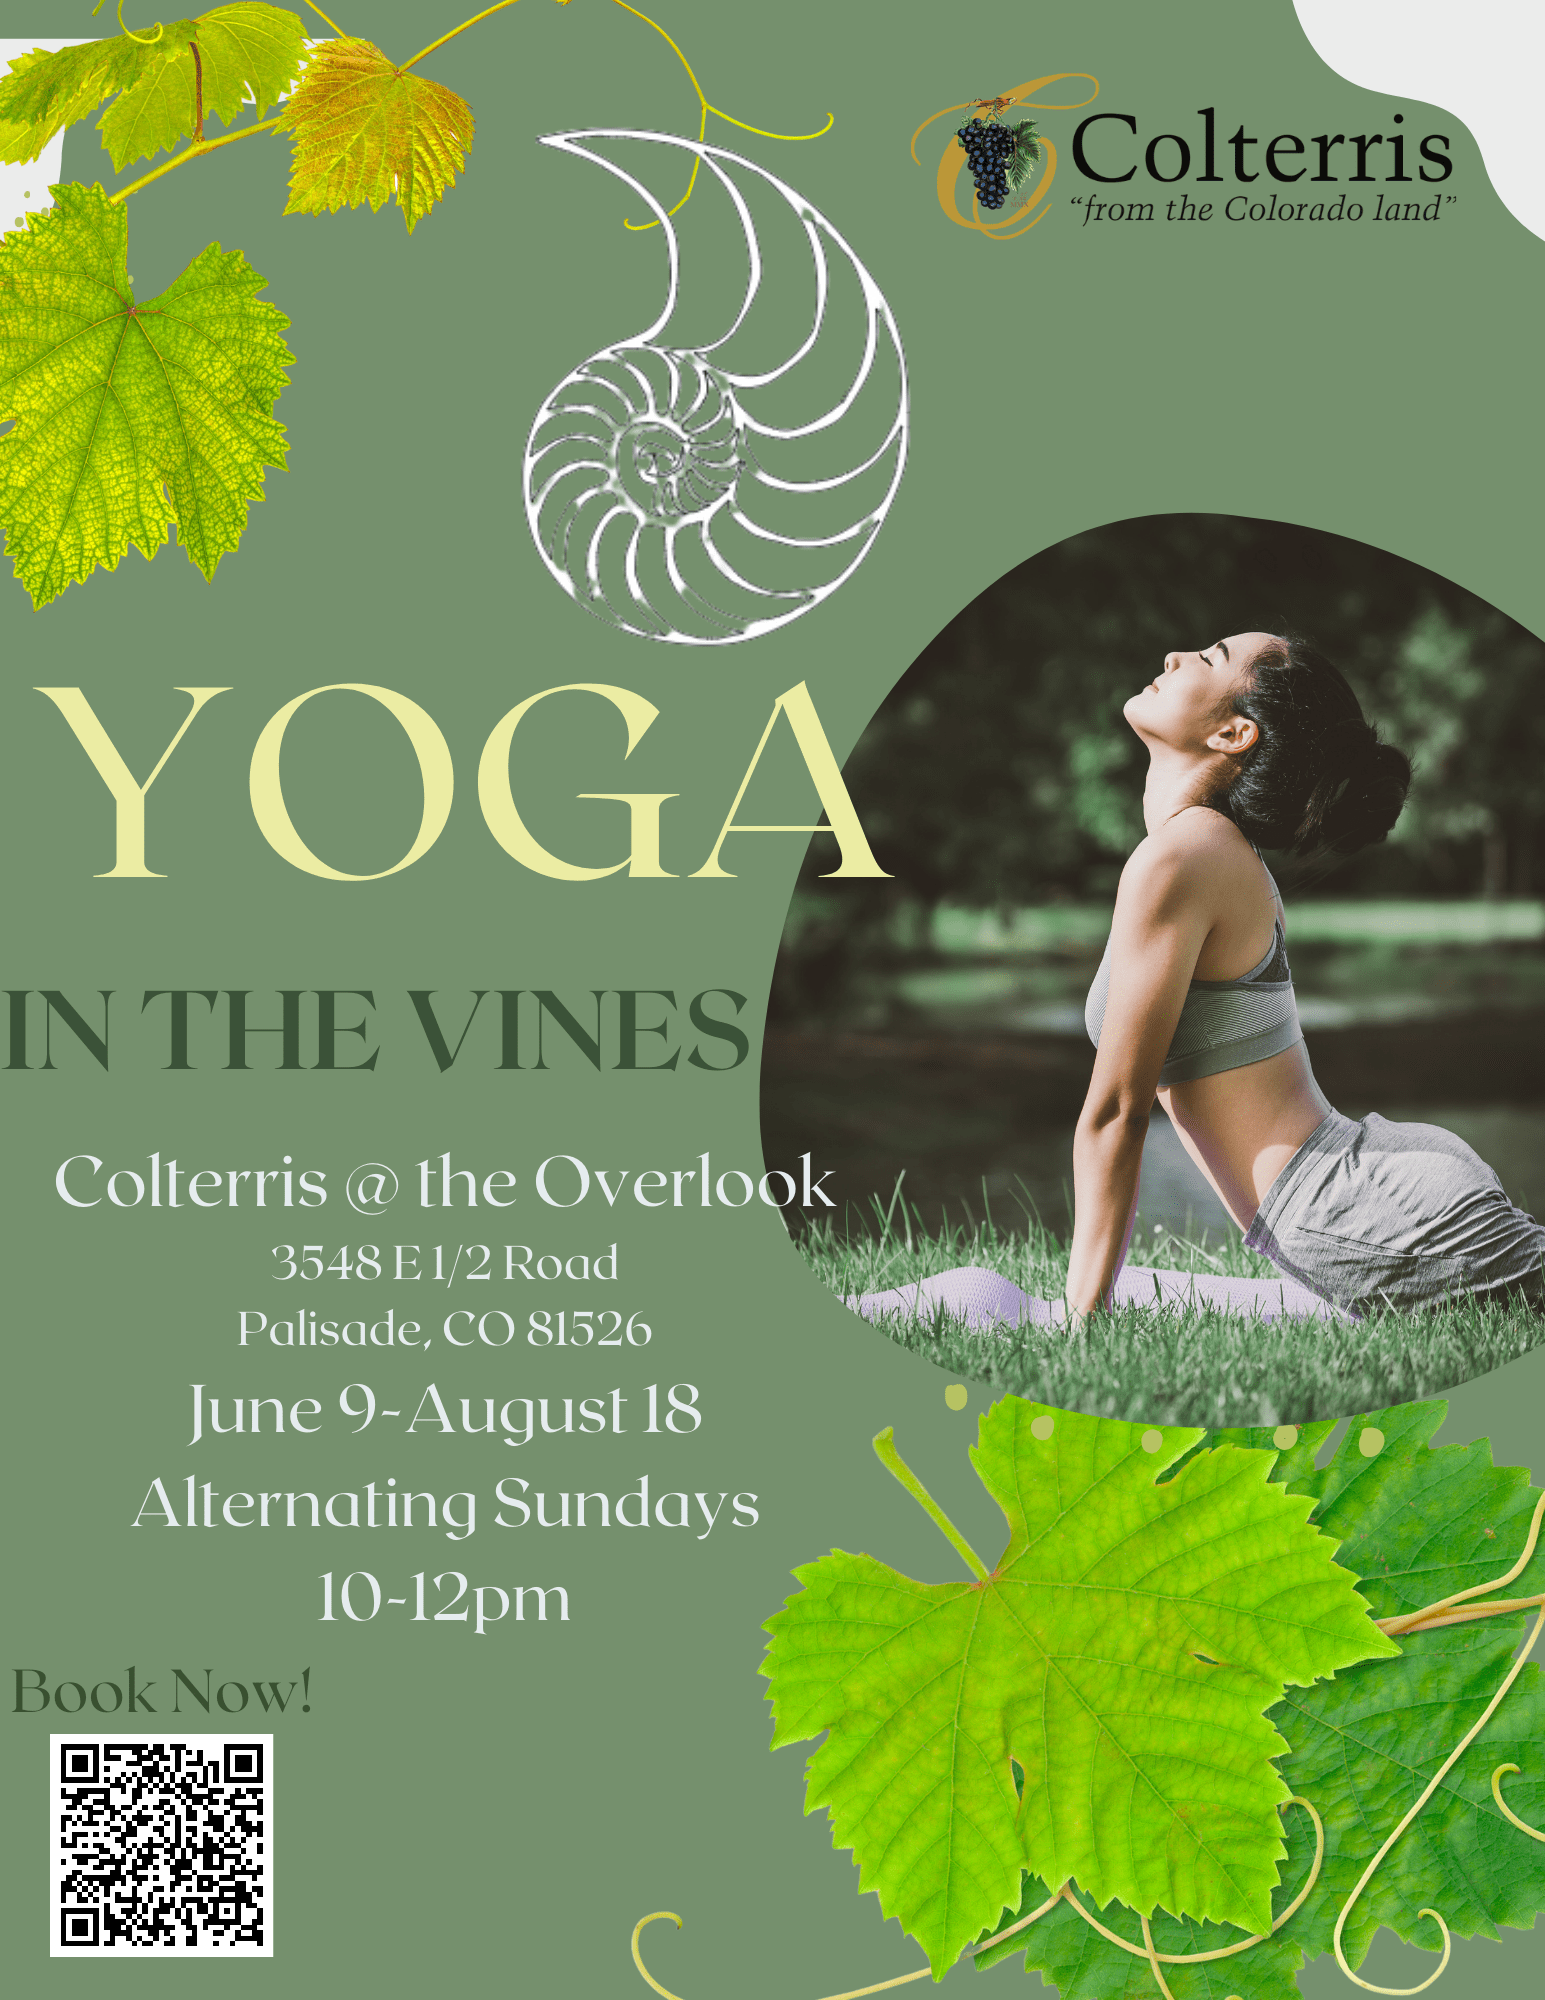 Yoga in the Vines flyer in Palisade Colorado at Colterris